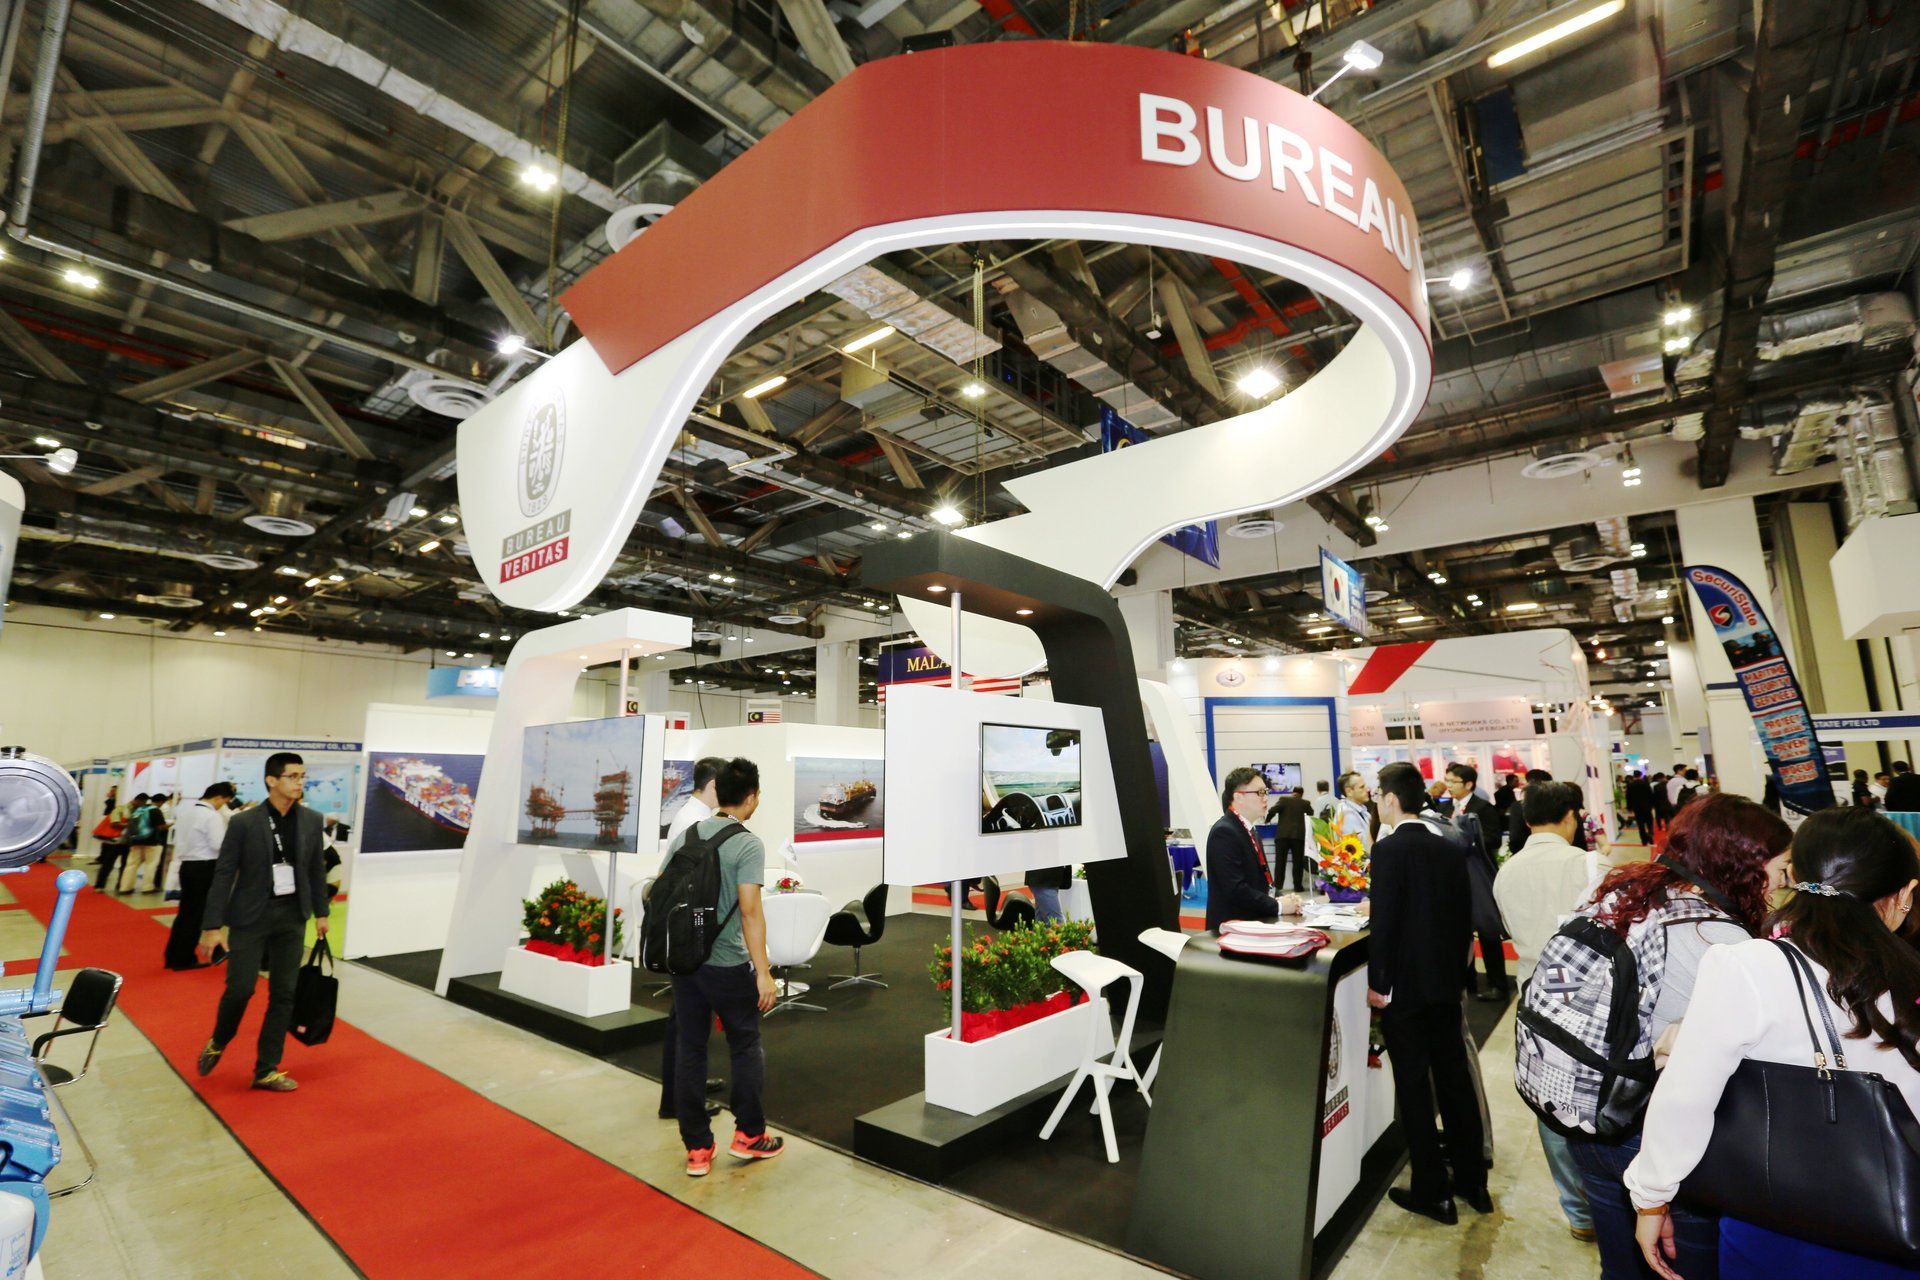 Bureau Veritas @ Asia Pacific Maritime 2016. Booth designed and built by Essential Global Fairs.